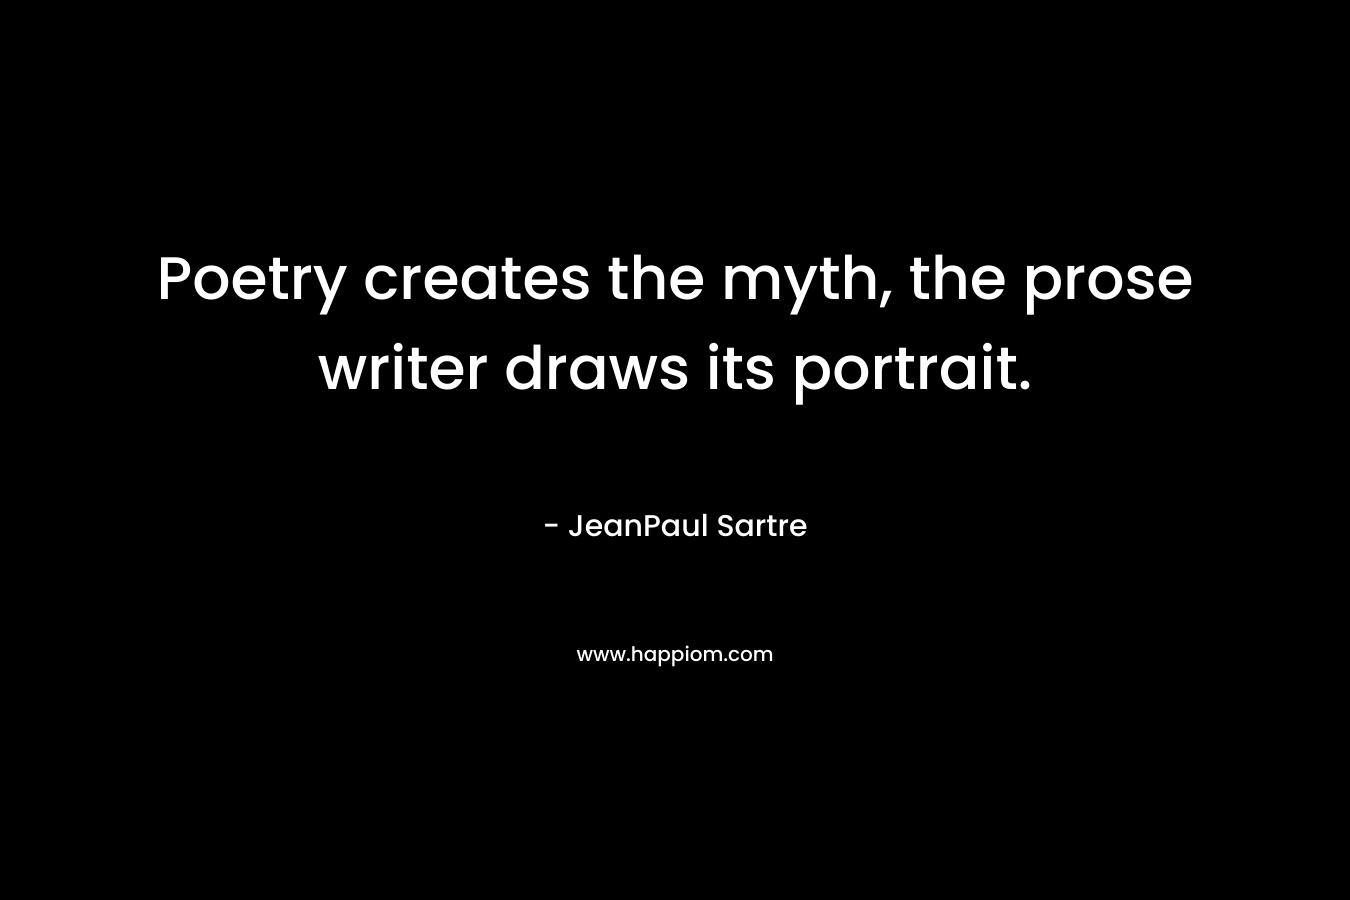 Poetry creates the myth, the prose writer draws its portrait.